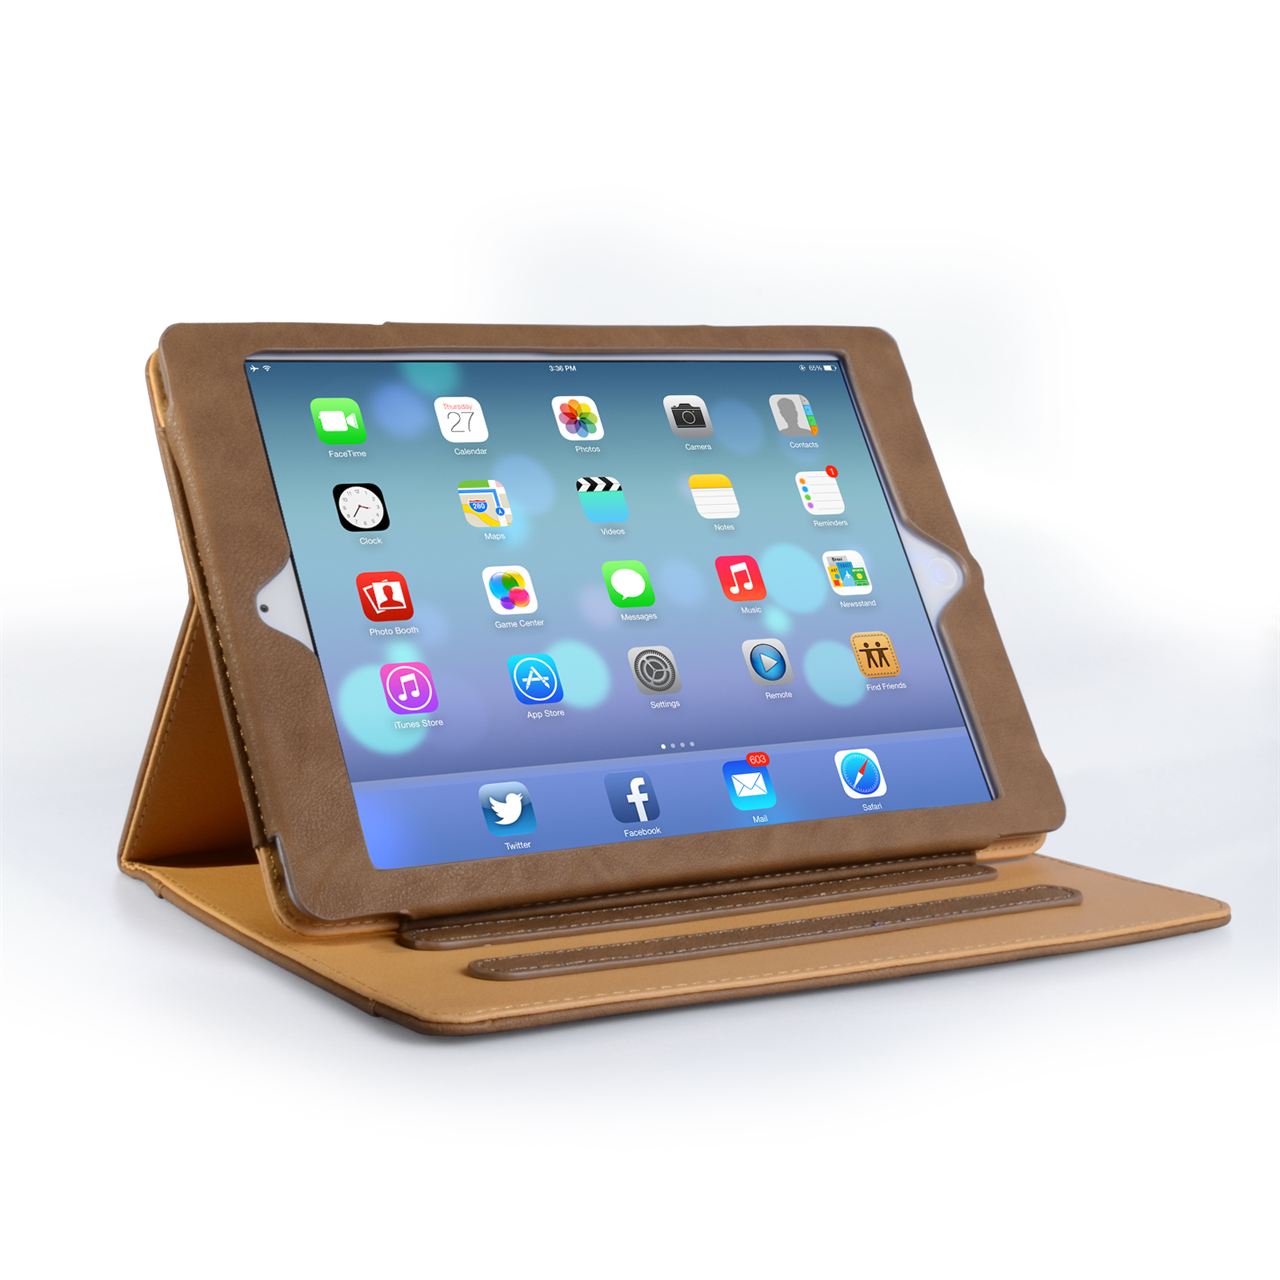 Caseflex iPad Air Textured Faux Leather Stand Case - Brown and Tan